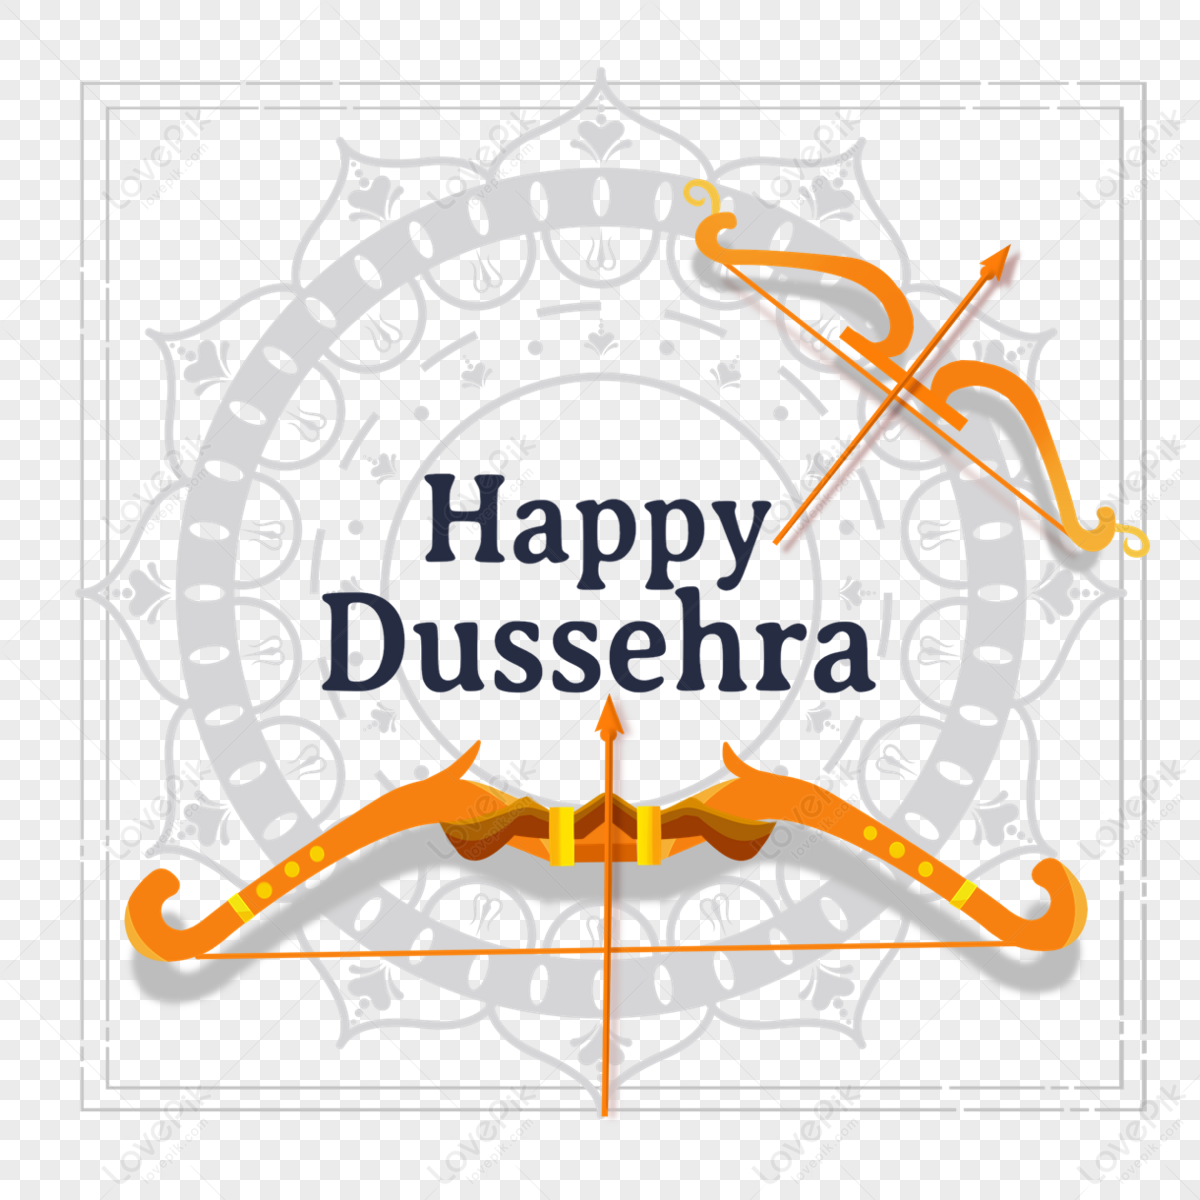 Dasara Images, HD Pictures For Free Vectors Download - Lovepik.com